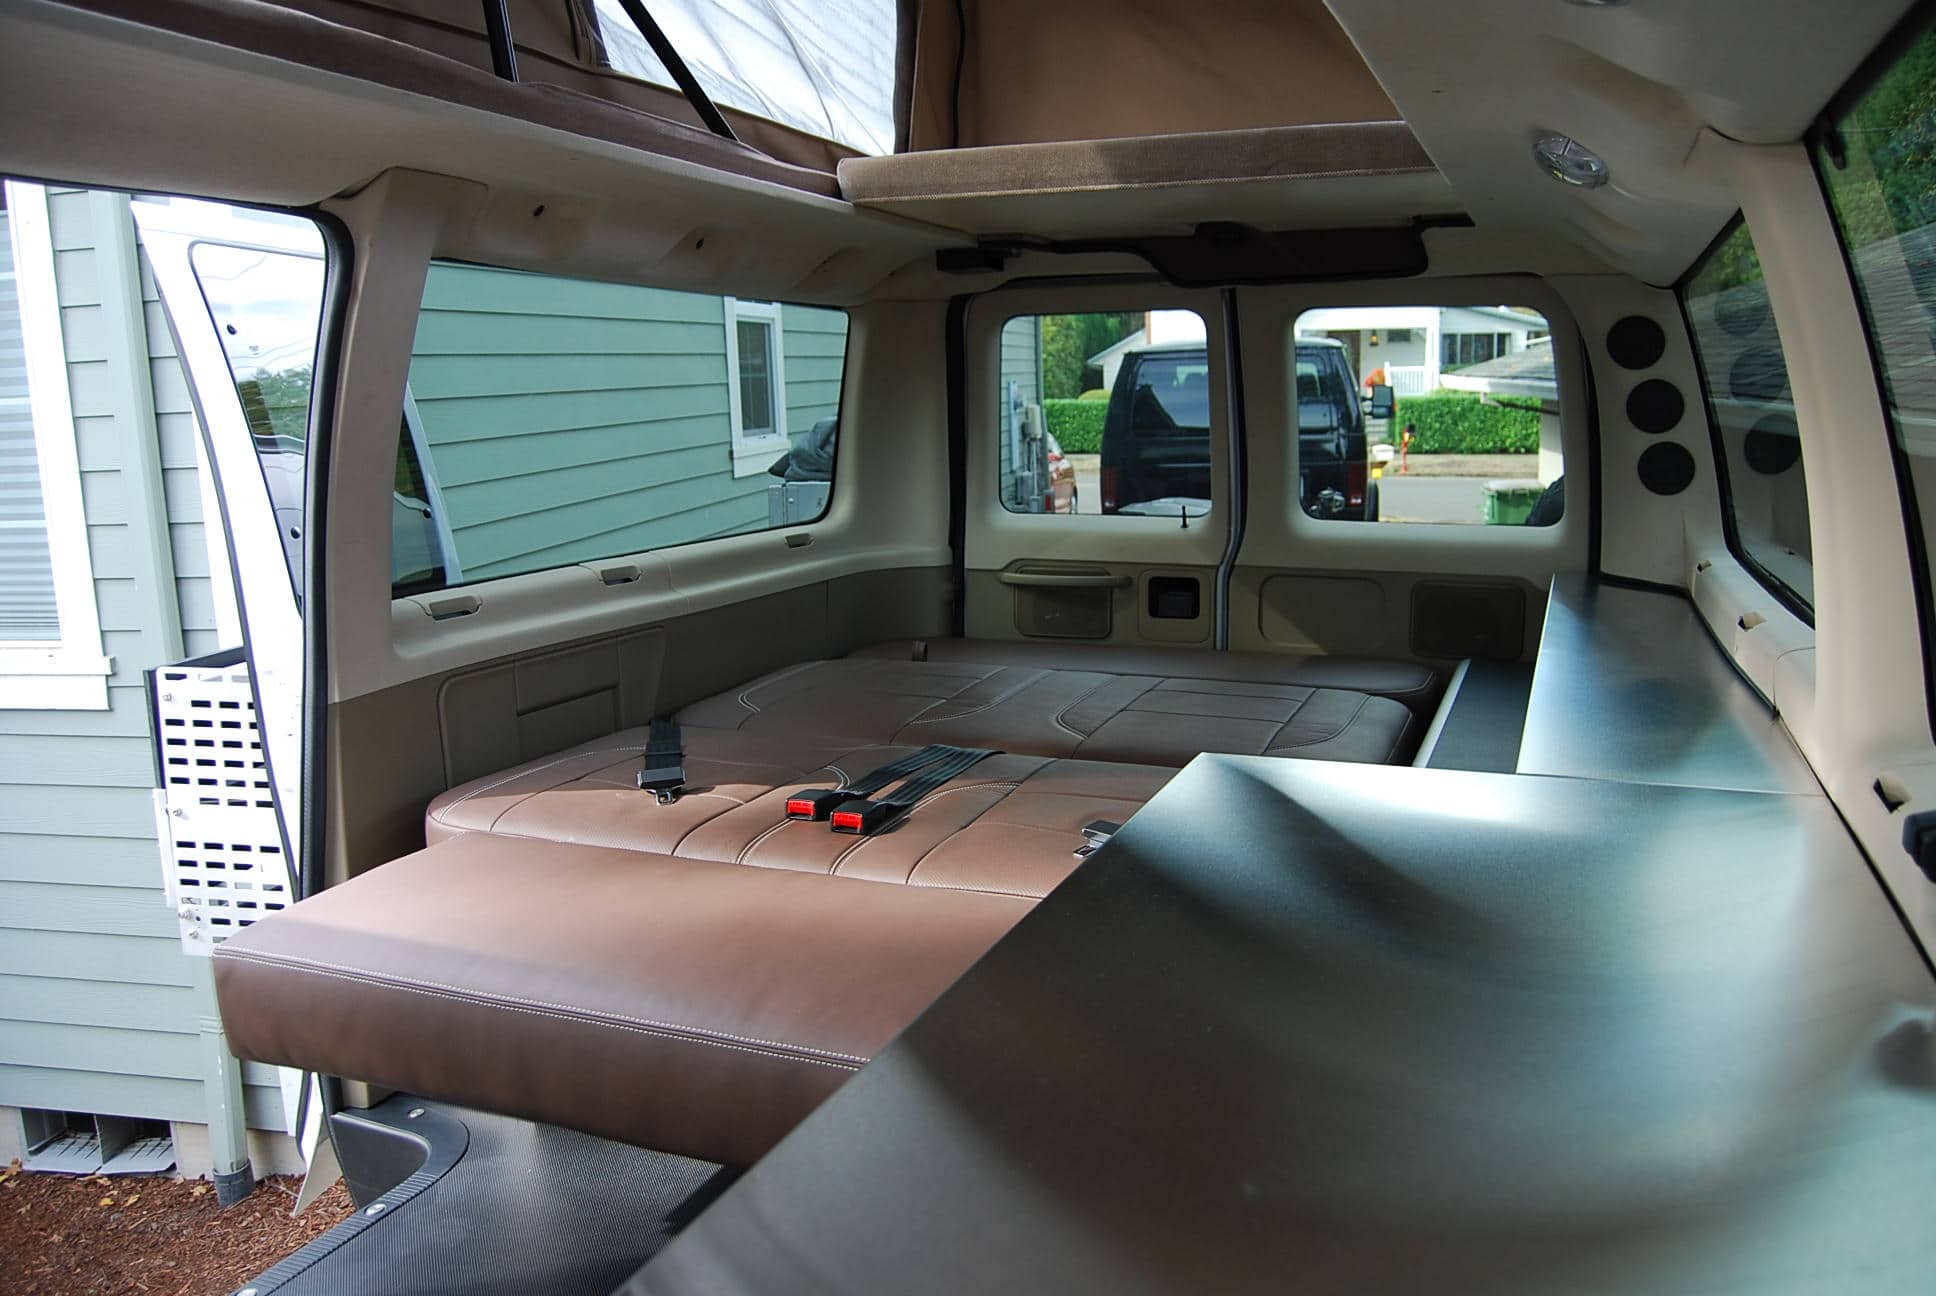 4×4 Van Conversions and Expedition Build Outs